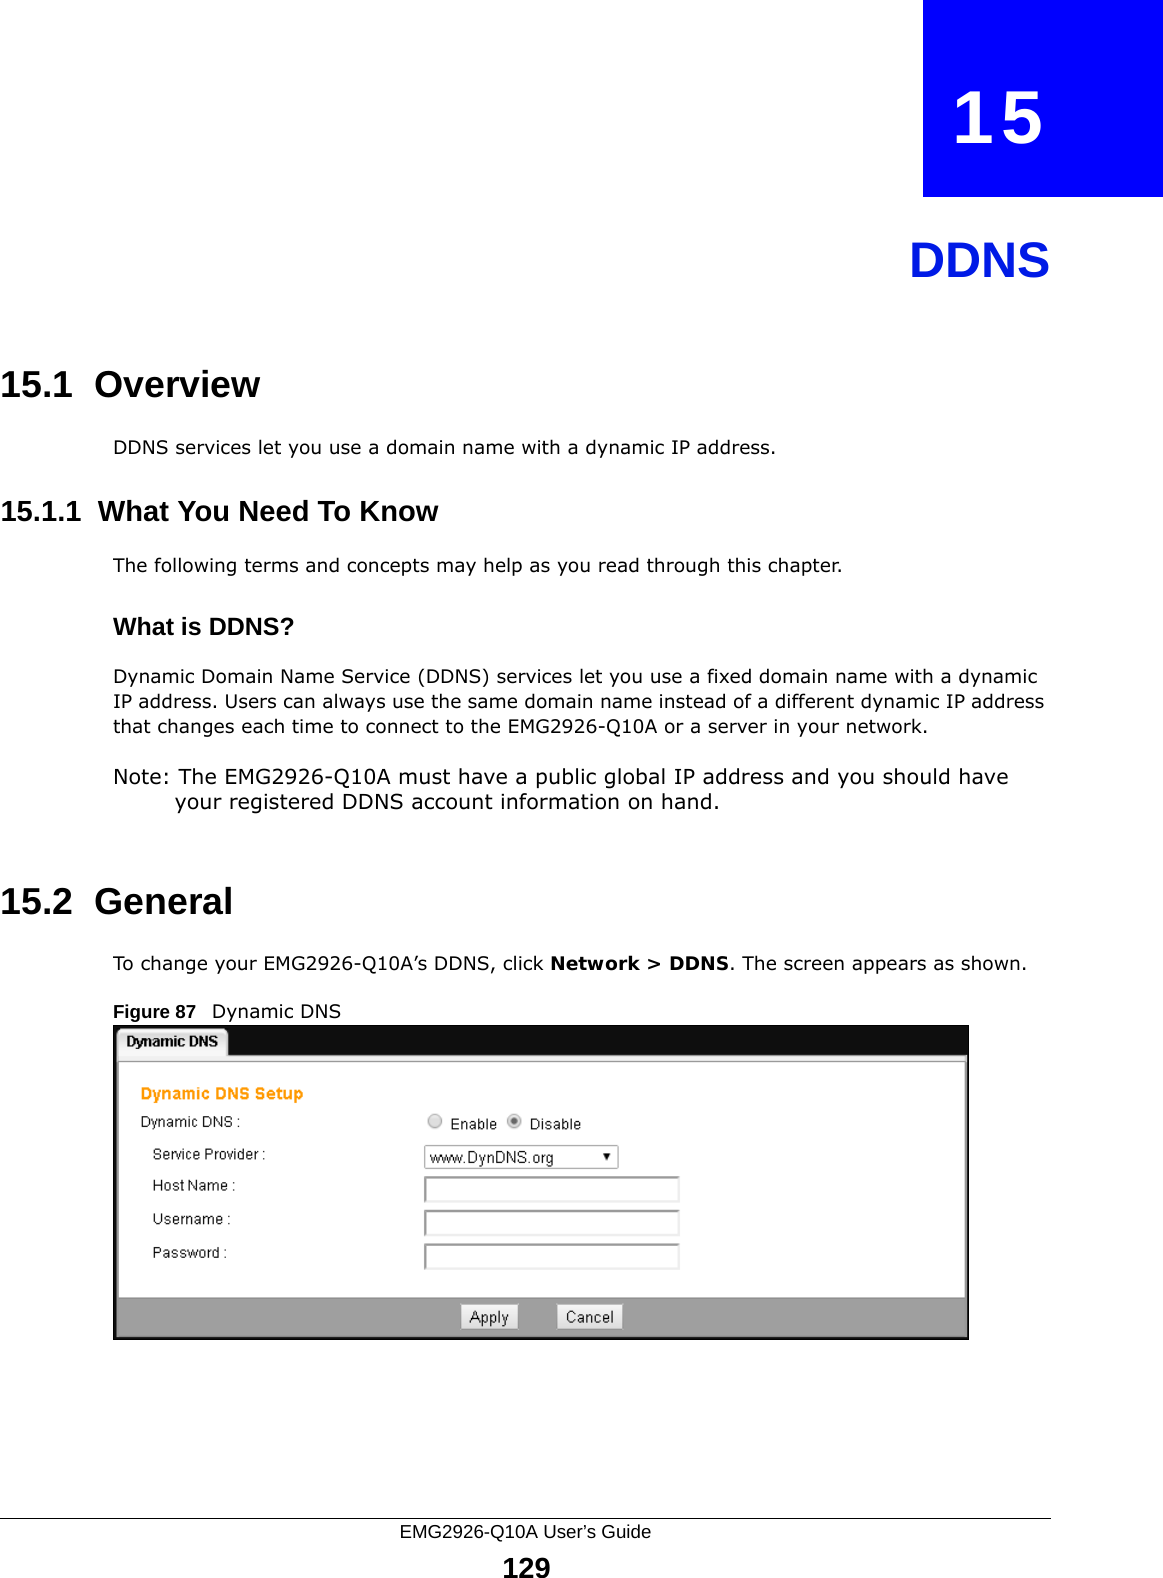 EMG2926-Q10A User’s Guide129CHAPTER   15DDNS15.1  Overview DDNS services let you use a domain name with a dynamic IP address.15.1.1  What You Need To KnowThe following terms and concepts may help as you read through this chapter.What is DDNS?Dynamic Domain Name Service (DDNS) services let you use a fixed domain name with a dynamic IP address. Users can always use the same domain name instead of a different dynamic IP address that changes each time to connect to the EMG2926-Q10A or a server in your network.Note: The EMG2926-Q10A must have a public global IP address and you should have your registered DDNS account information on hand.15.2  General   To change your EMG2926-Q10A’s DDNS, click Network &gt; DDNS. The screen appears as shown.Figure 87   Dynamic DNS